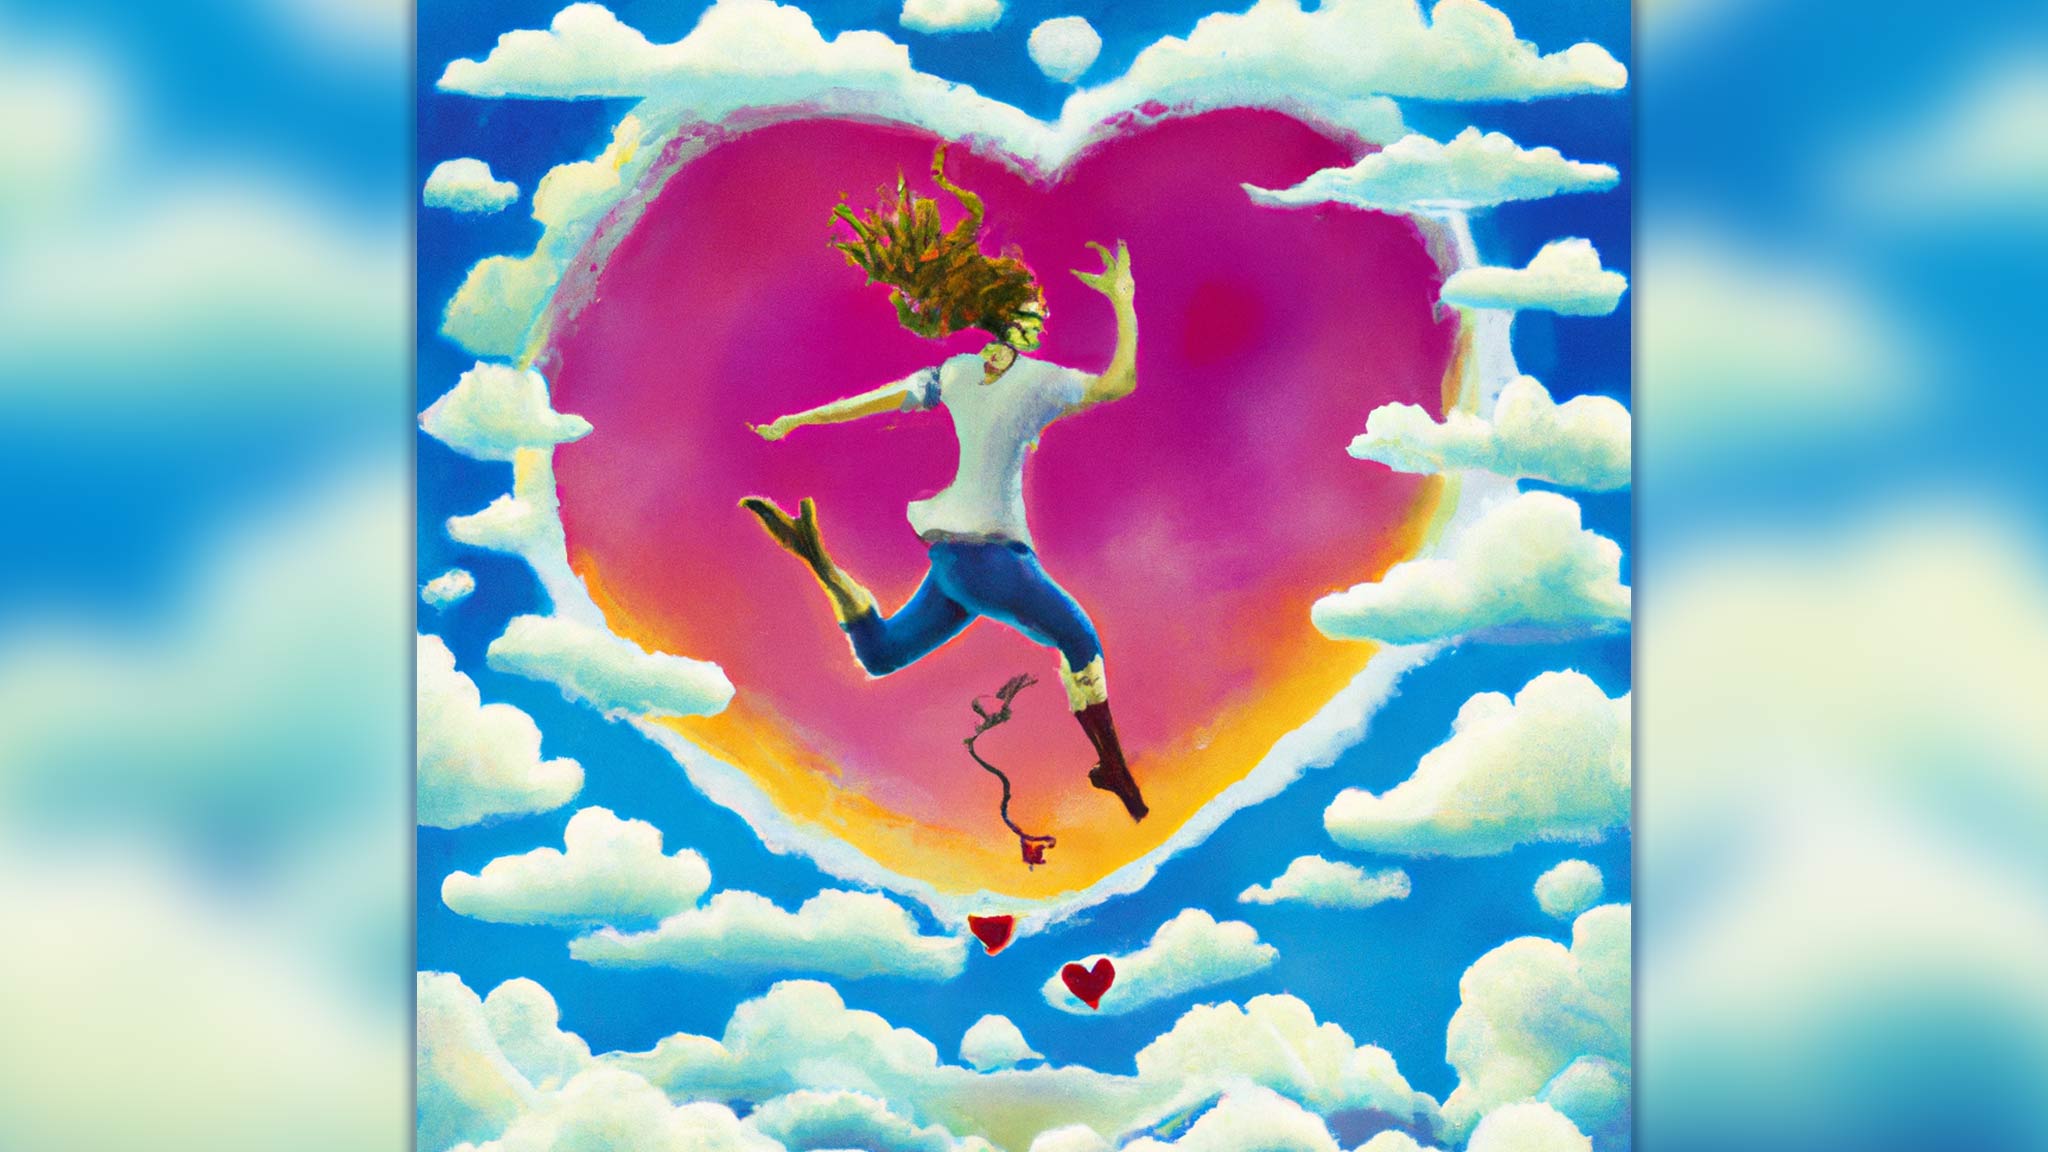 Rear View Abstract Painting Of Happy Carefree Woman Leaping Into Bright Pink Heart Surrounded By Sky And Clouds, Avoiding The Blues Concept